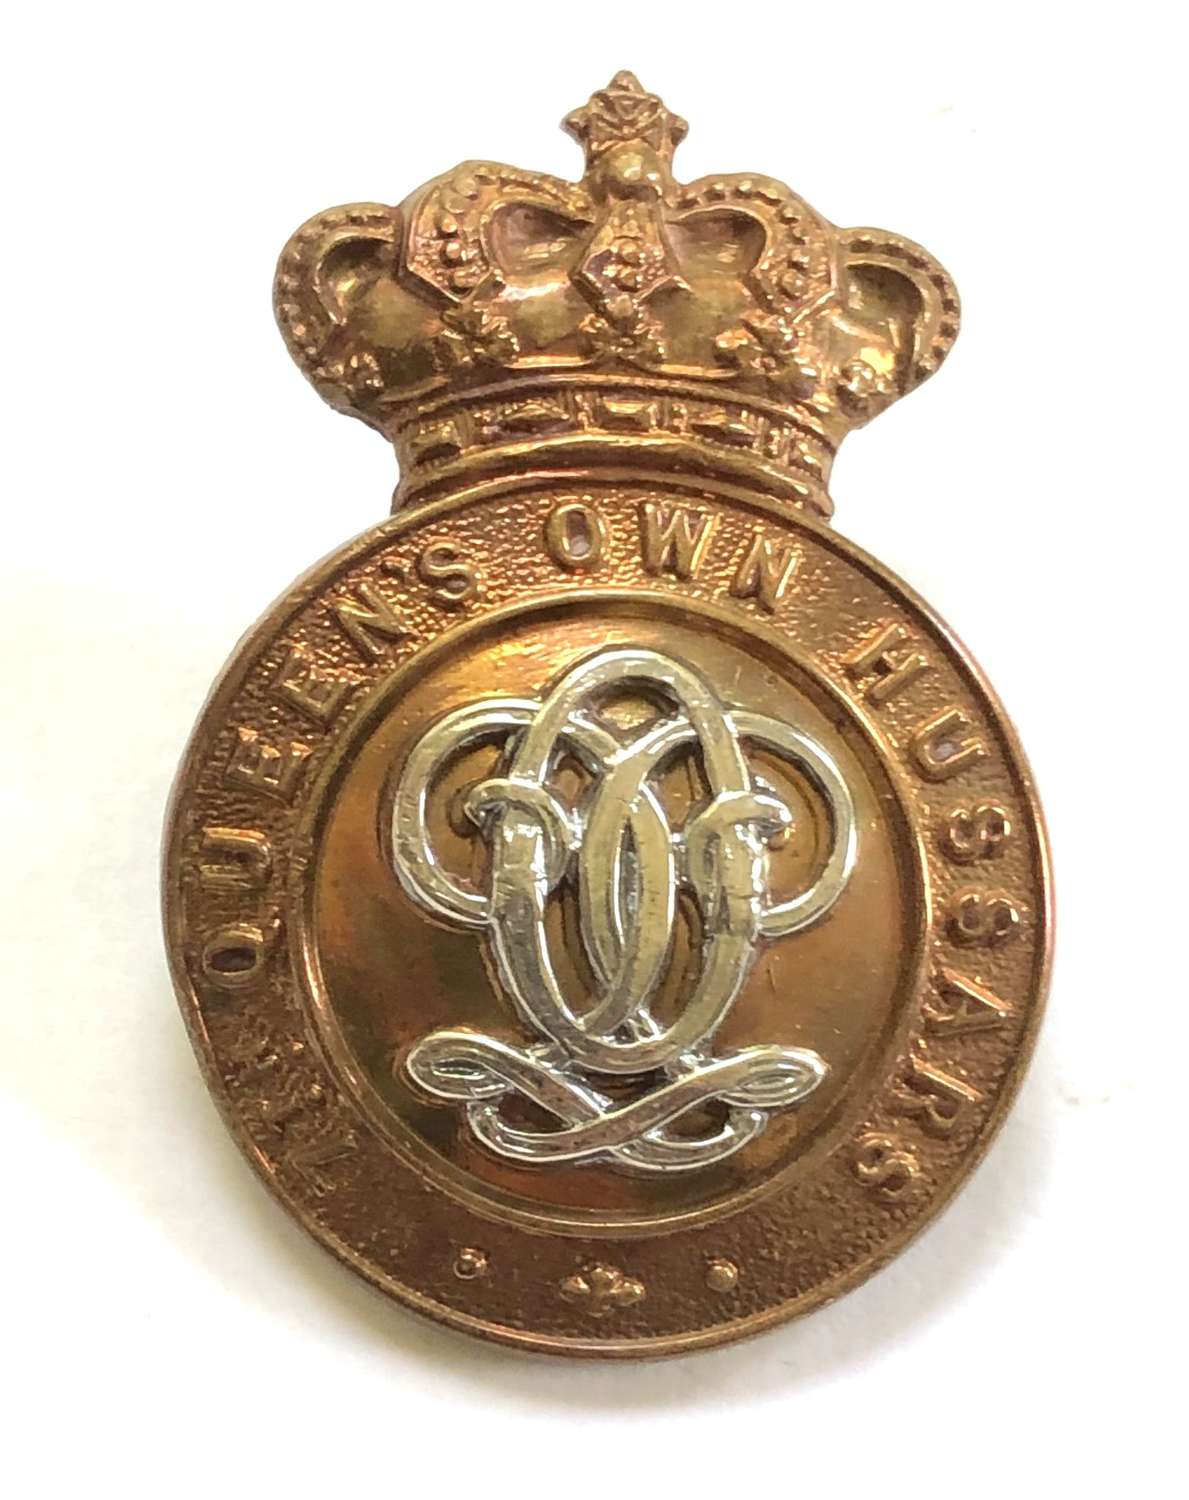 7th Queen’s Own Hussars Victorian OR’s cap badge circa 1896-1901